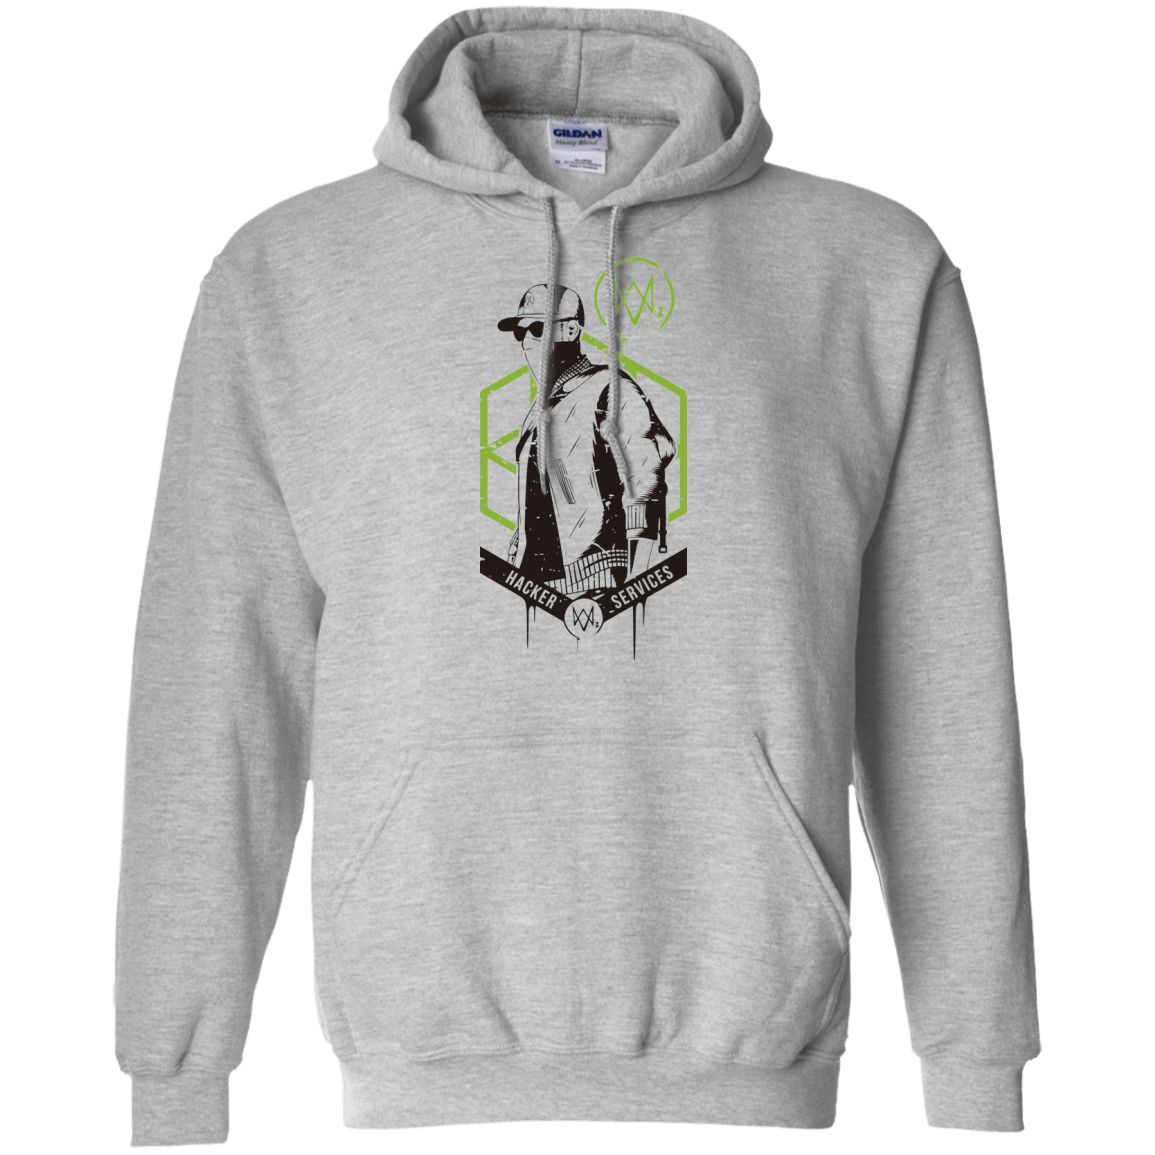 Sweatshirts Sport Grey / Small Watch Dogs 2 Hacker Services Pullover Hoodie